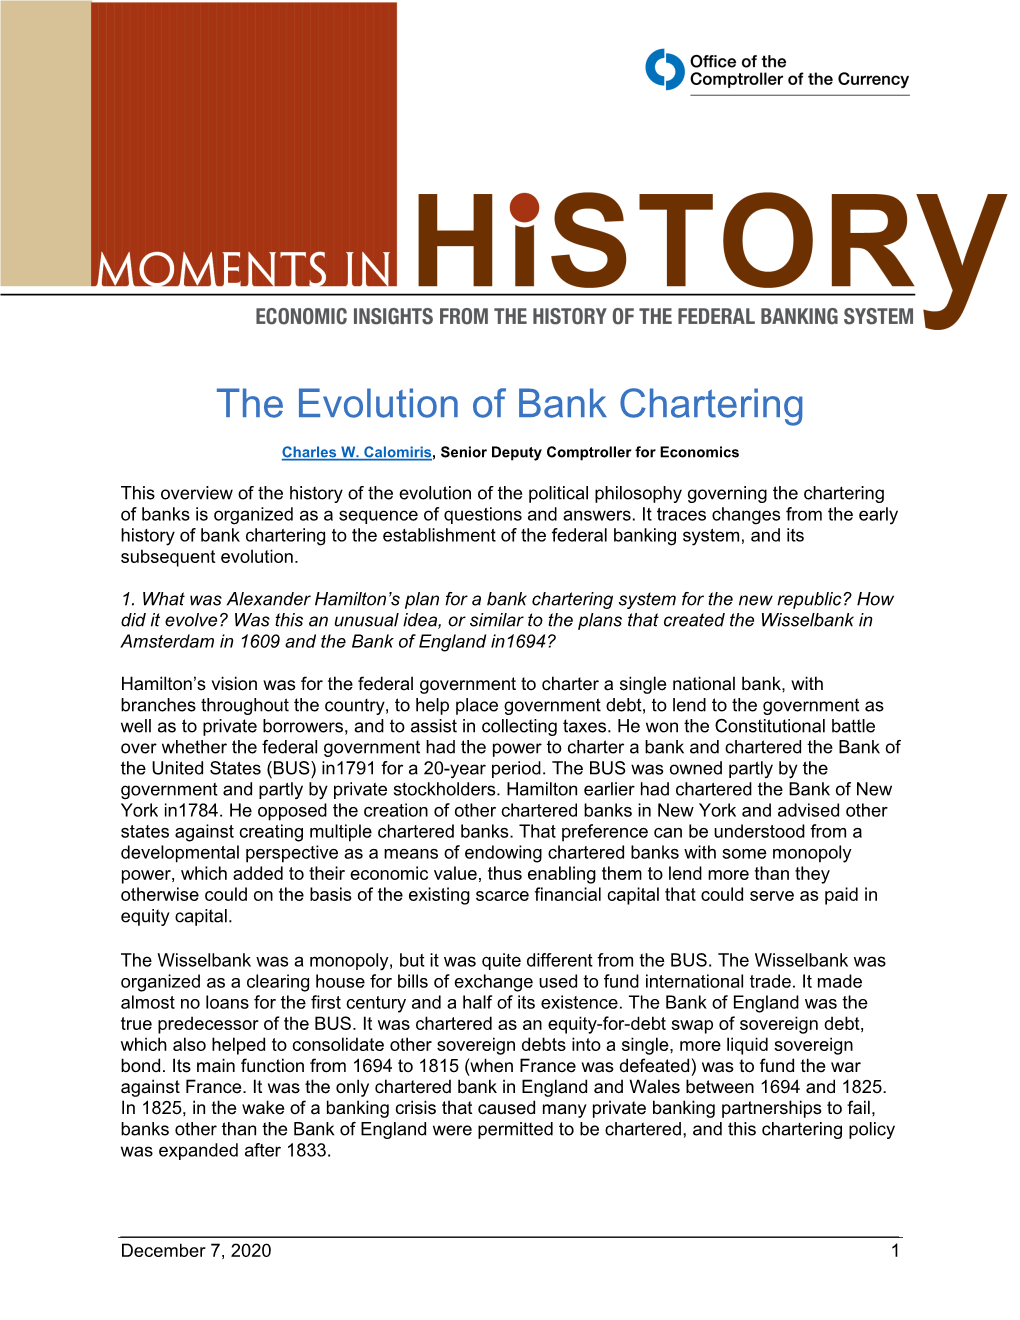 The Evolution of Bank Chartering